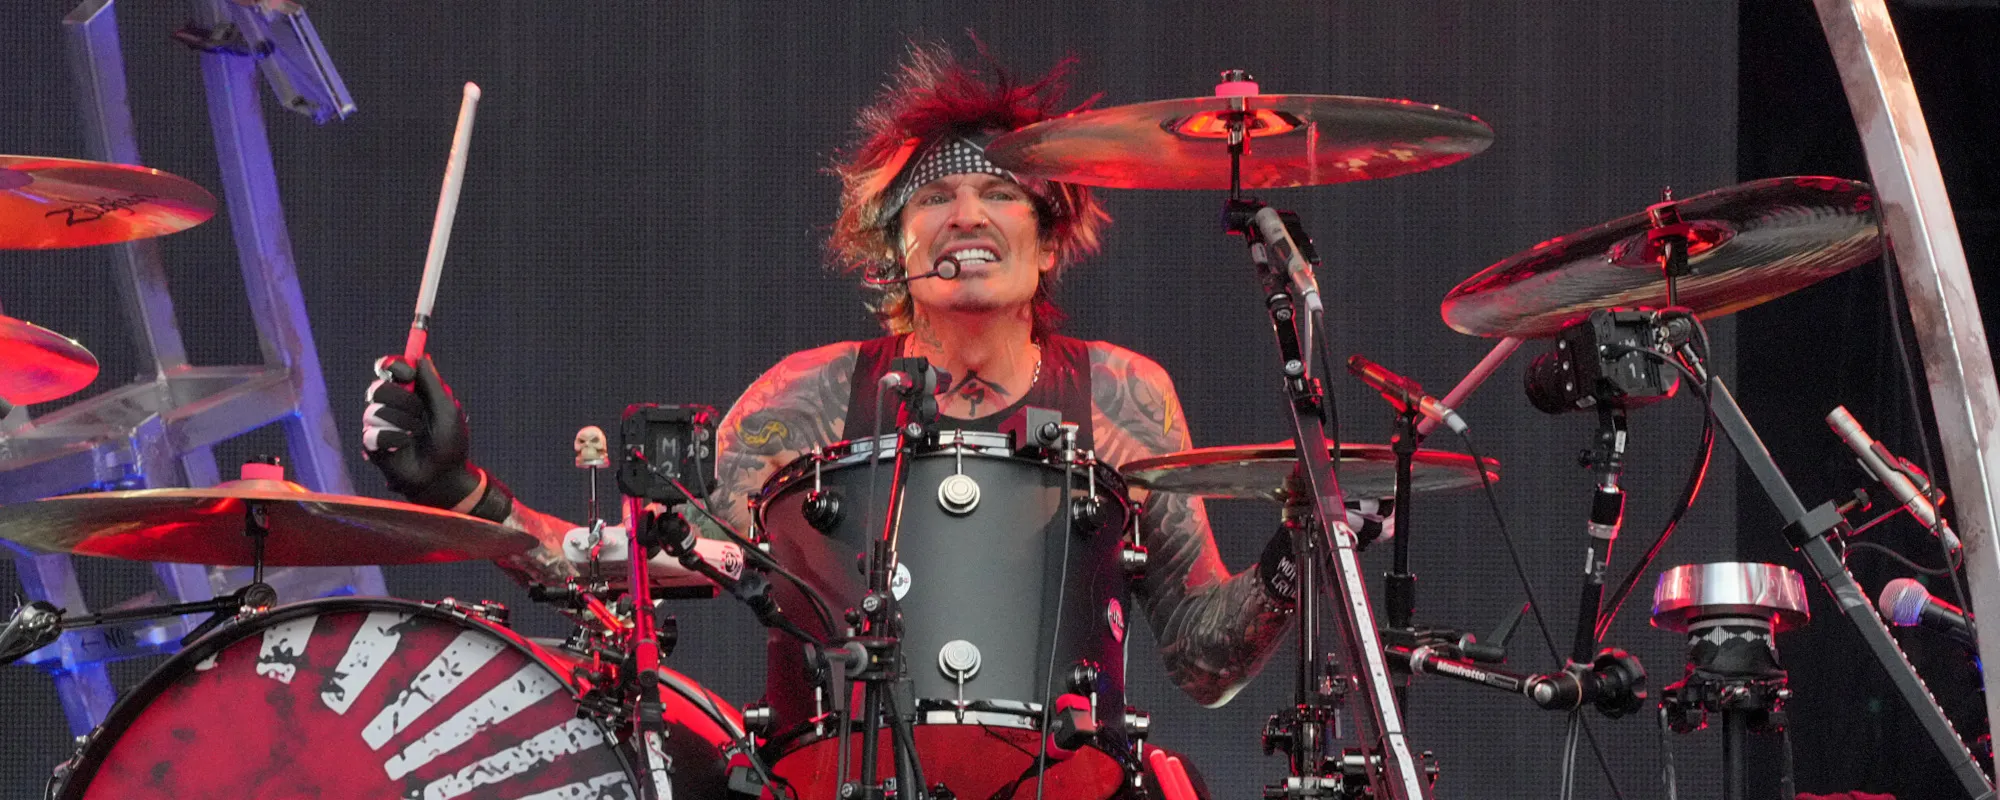 5 Songs You Didn’t Know Tommy Lee Co-Wrote for Motley Crue